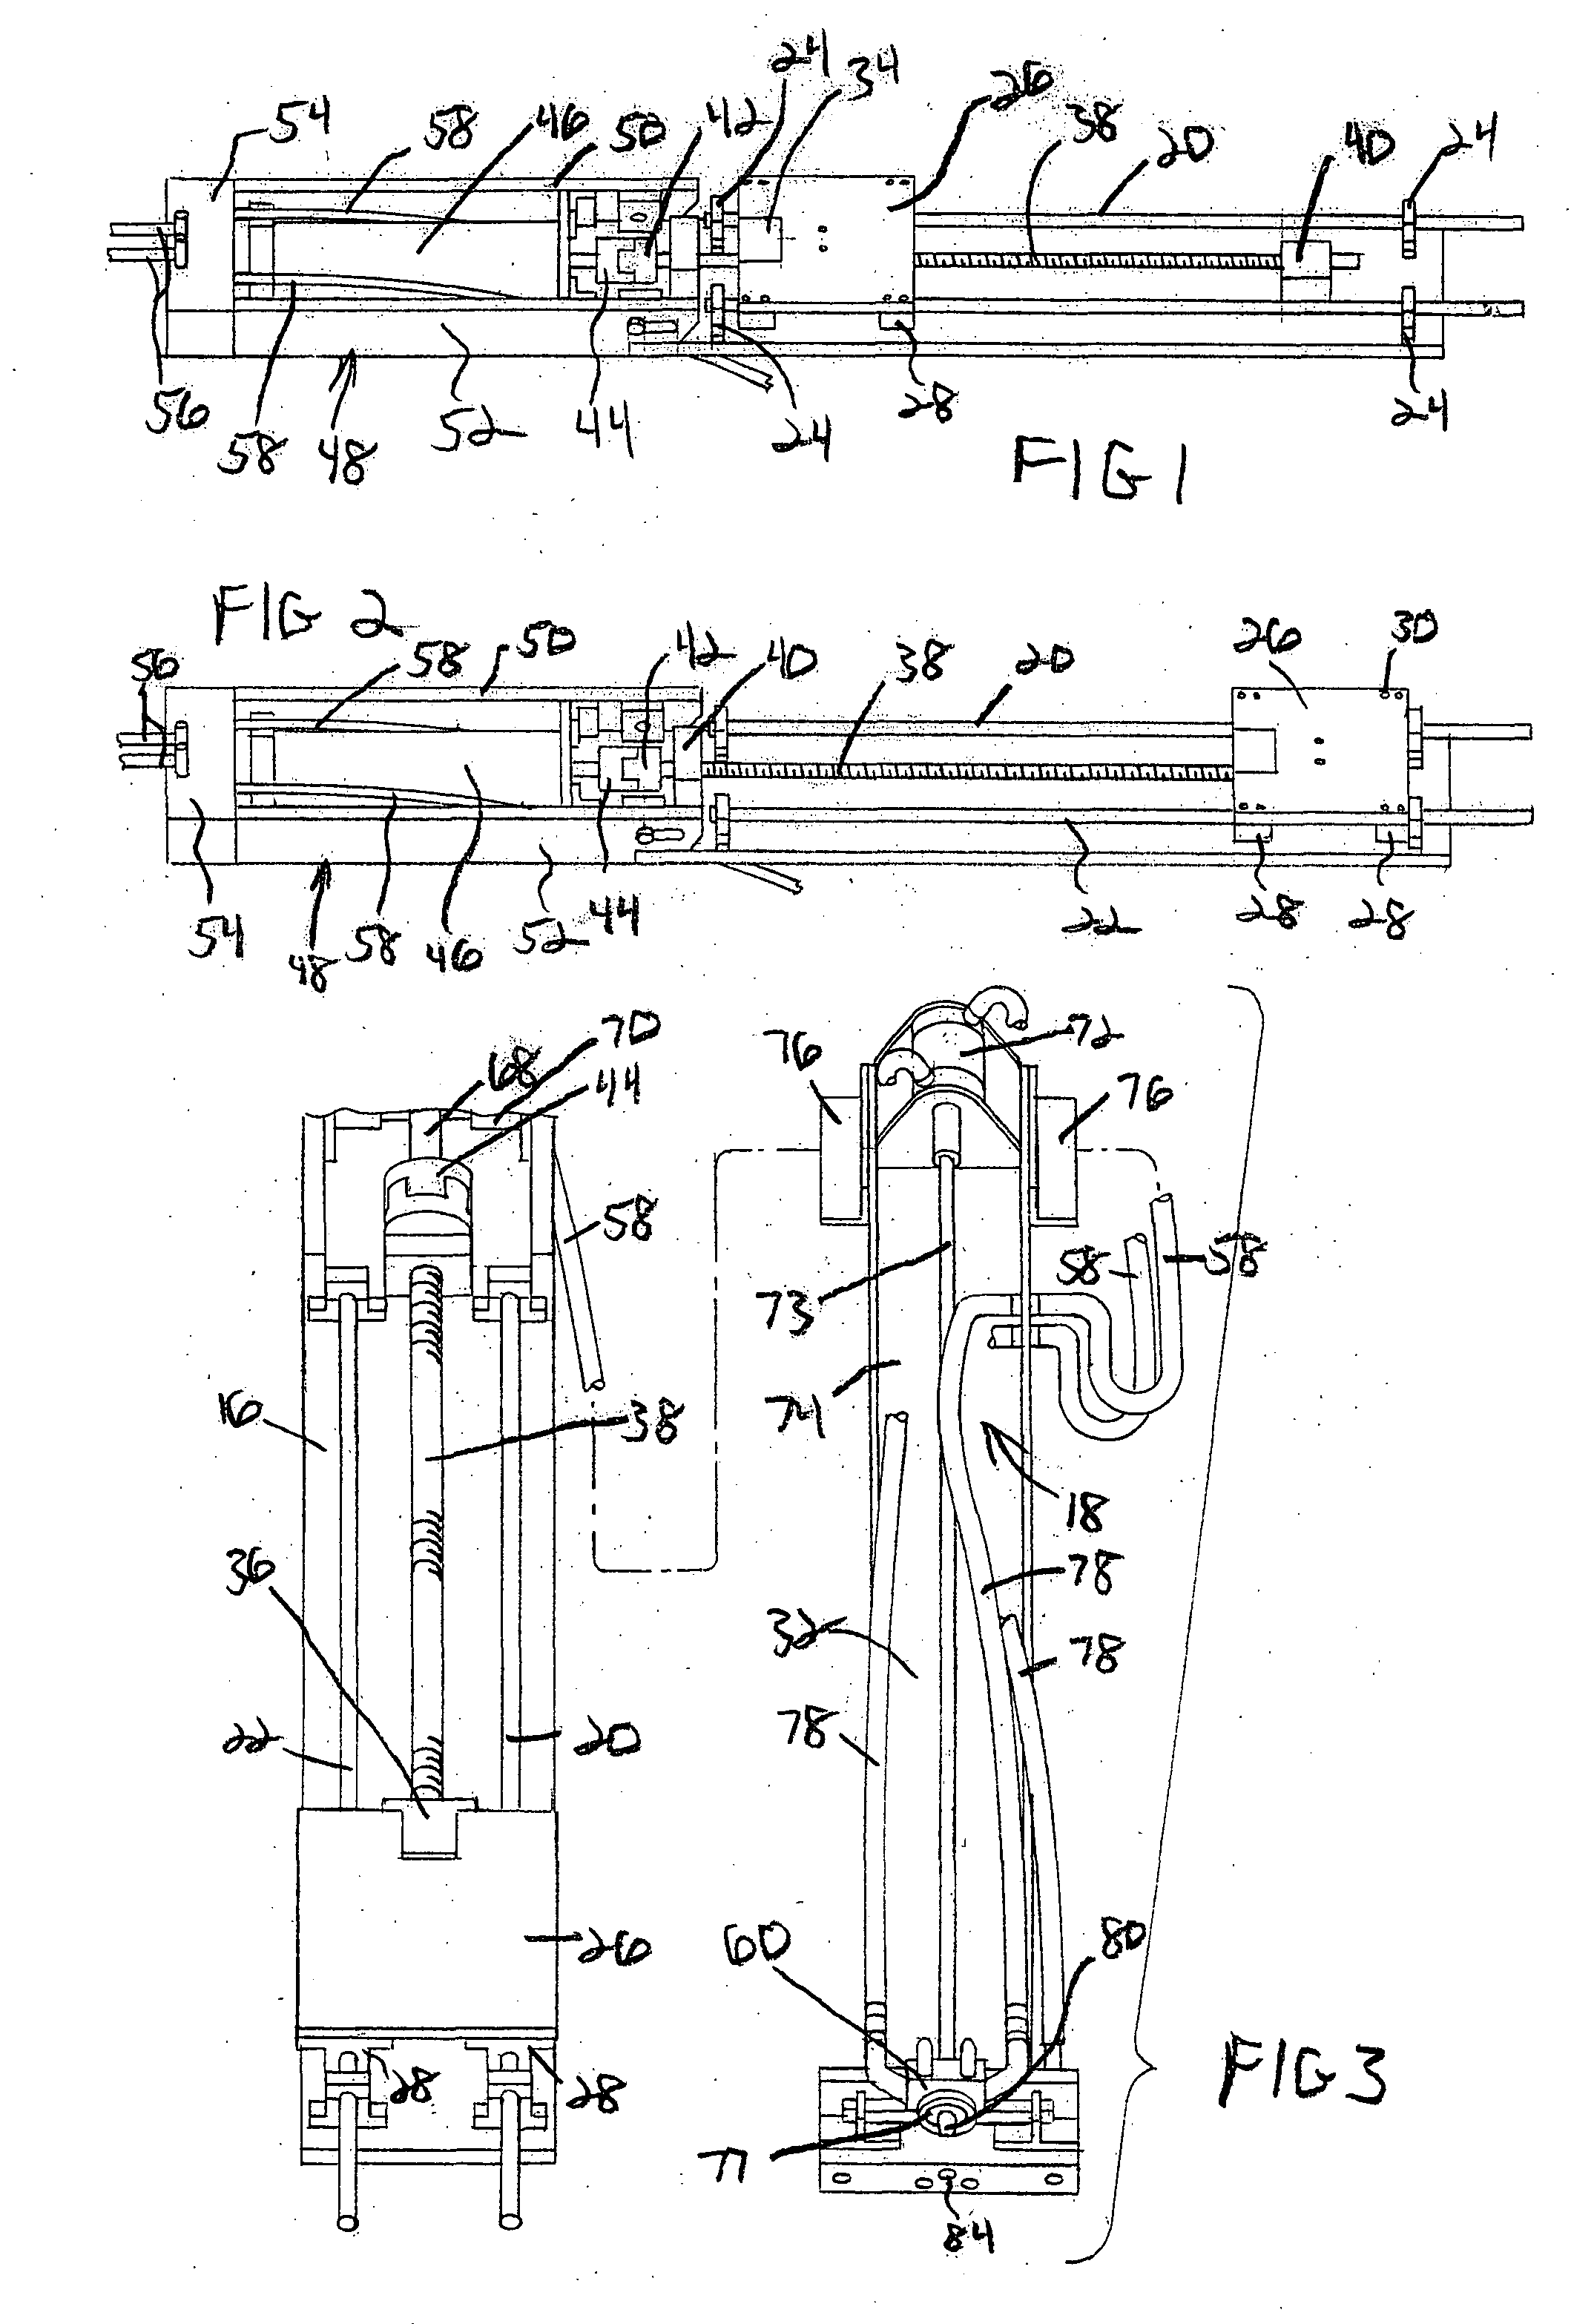 Sprayed in place pipe lining apparatus and method thereof